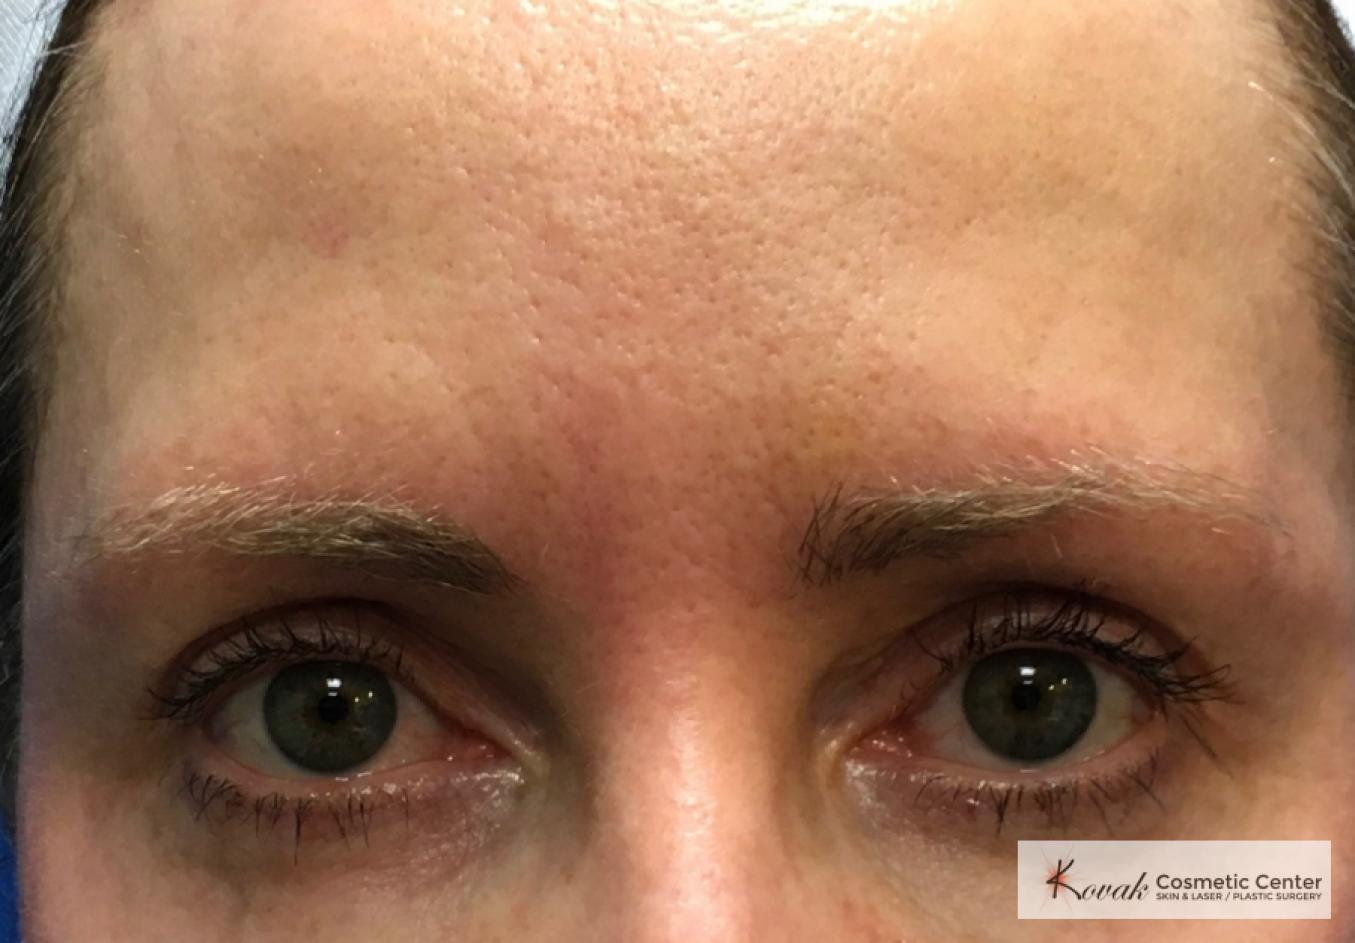 Upper eyelid treatment using Agnes on a 49 year old woman - Before 1